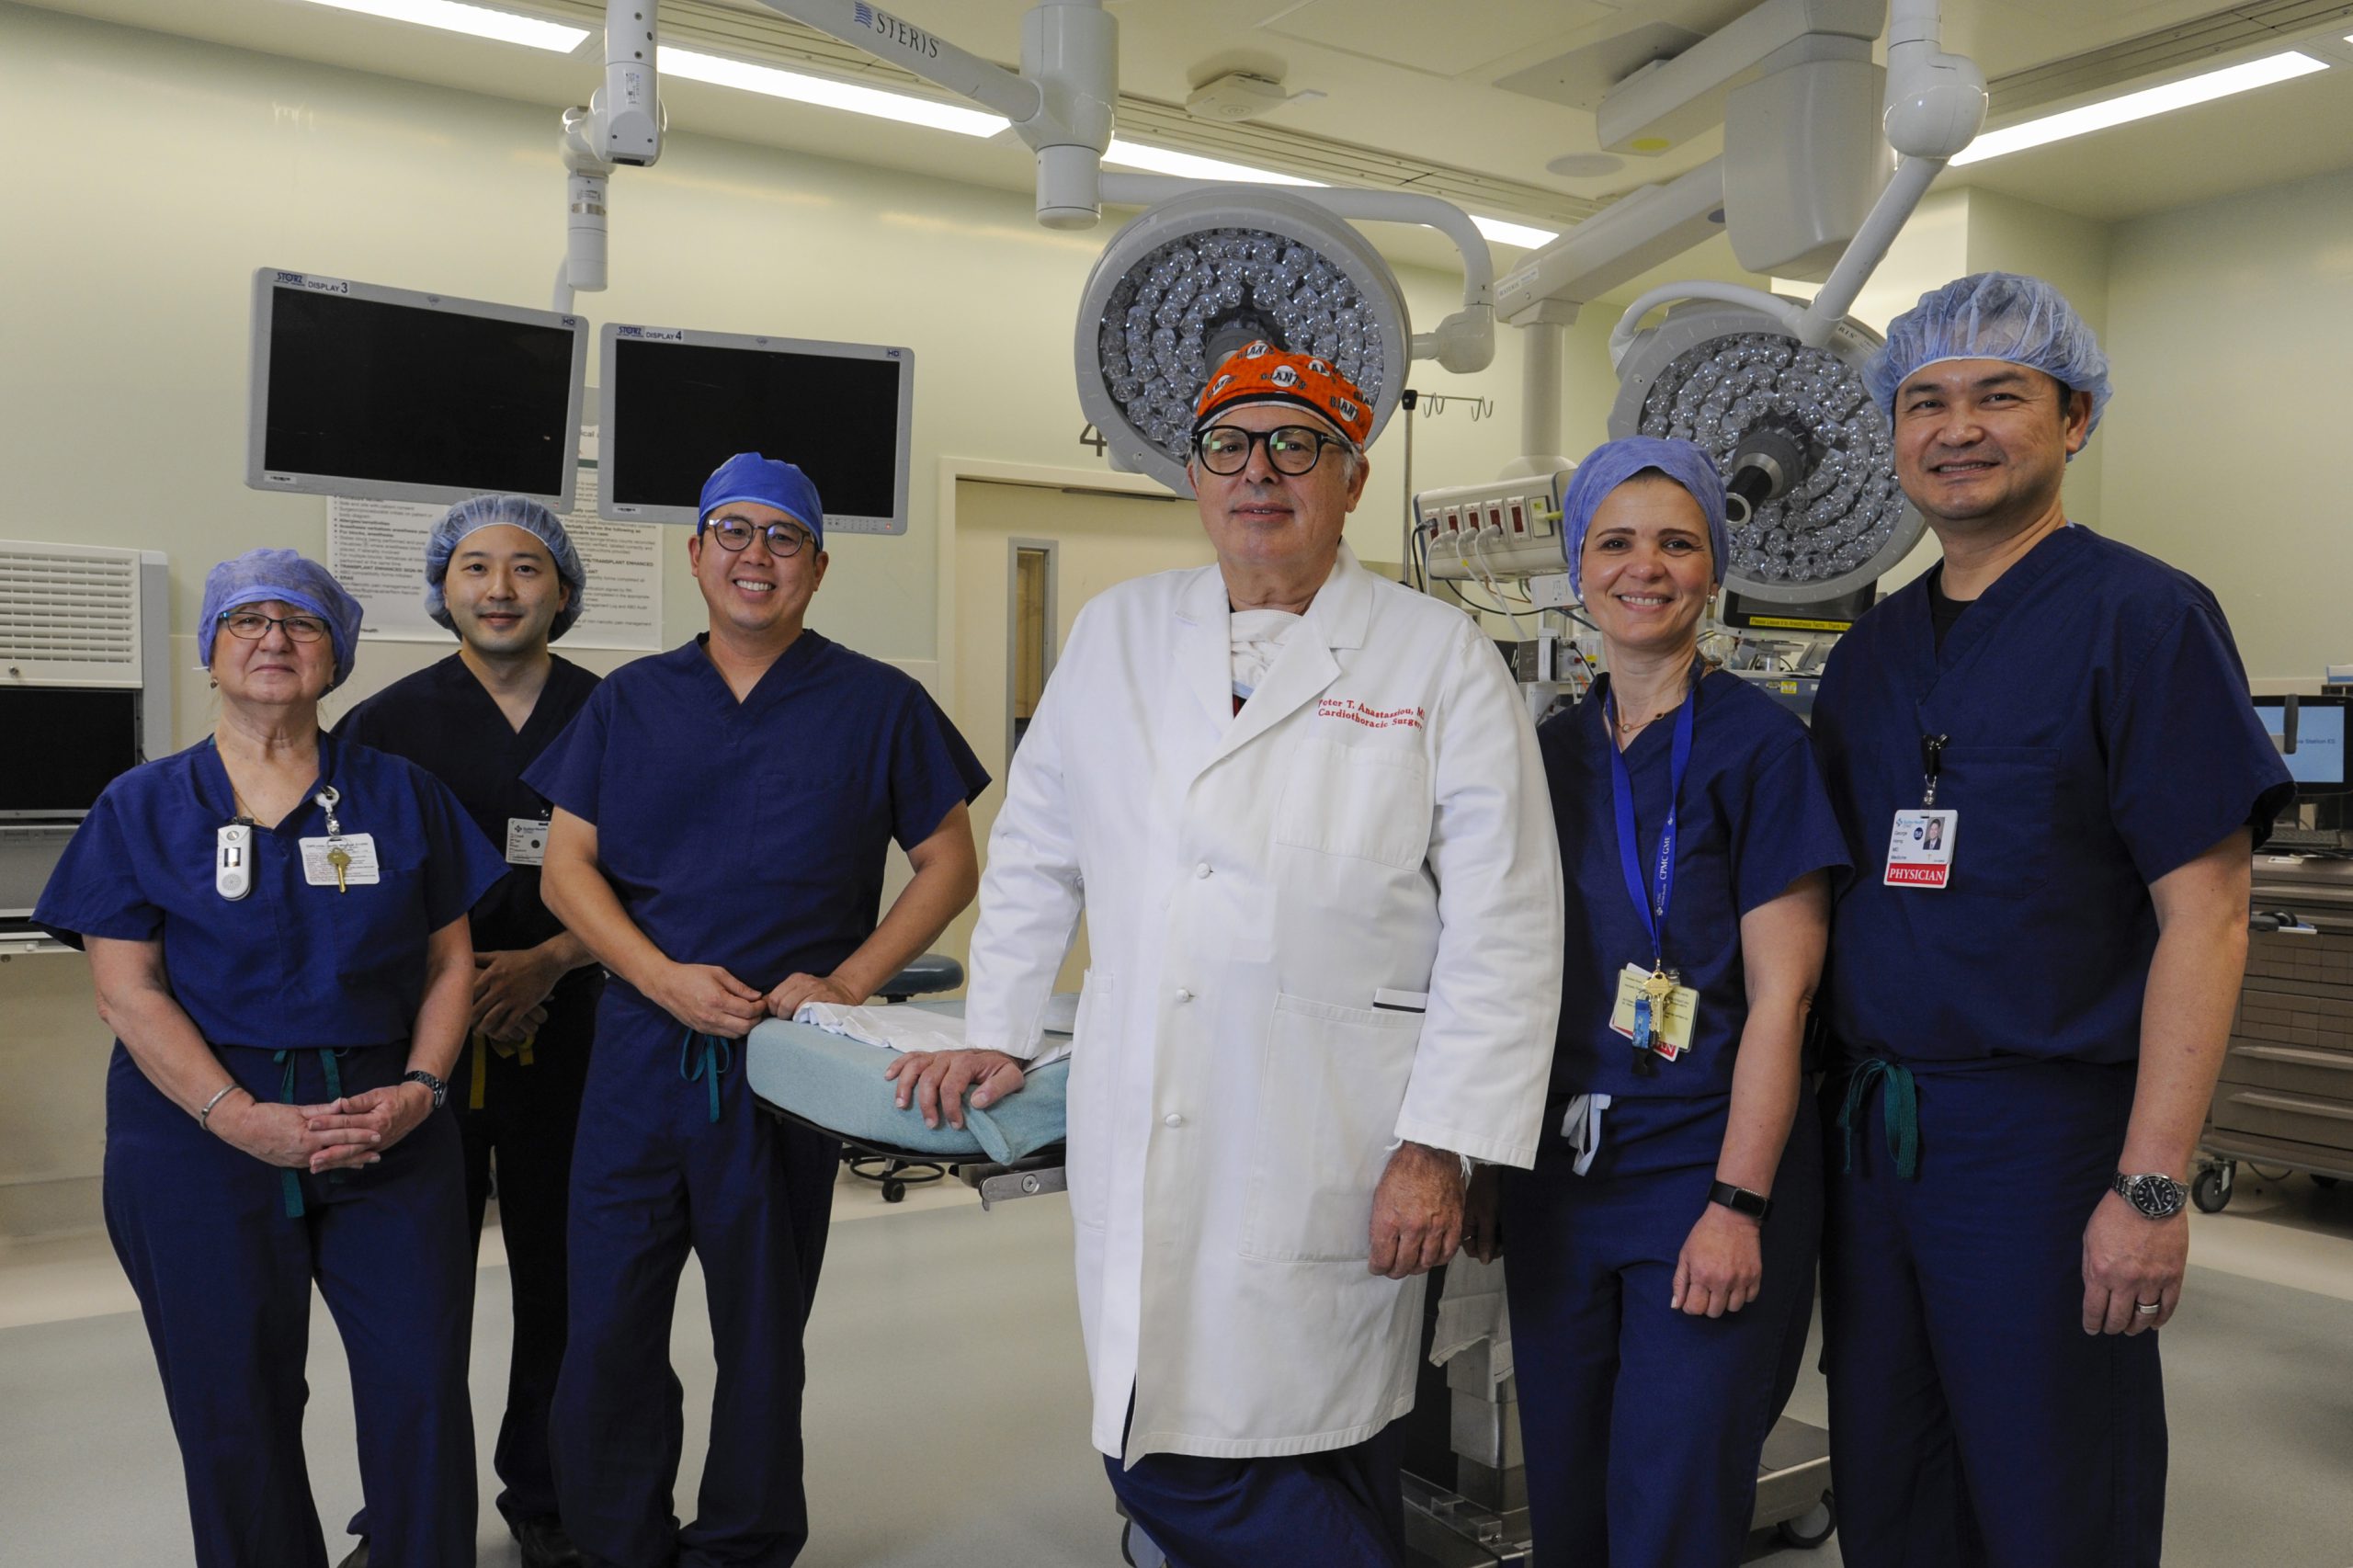 A doctor in white lab coat is flanked by his team in blue scrubs